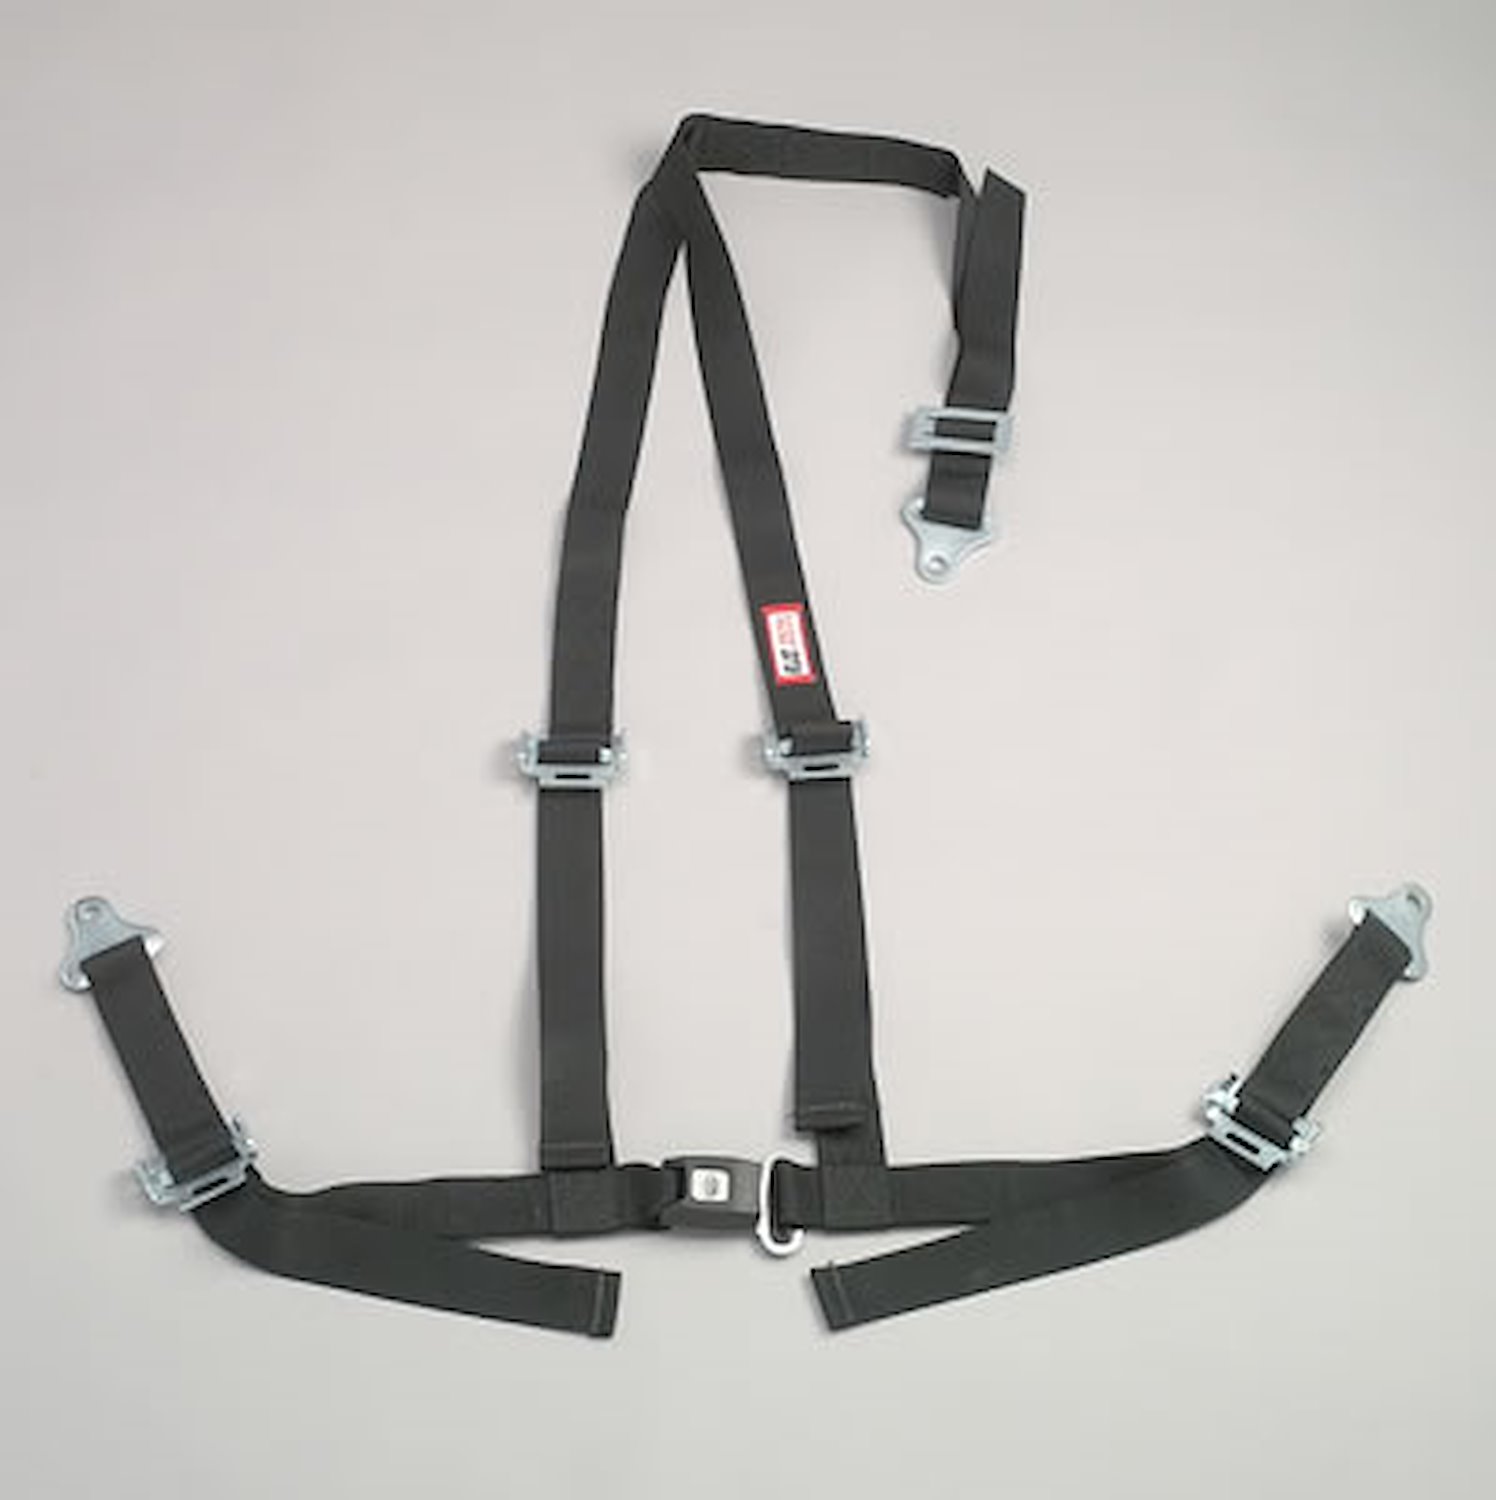 NON-SFI B&T HARNESS 2 PULL UP Lap Belt SNAP 2 S. H. V ROLL BAR Mount BOLT w/STERNUM STRAP RED